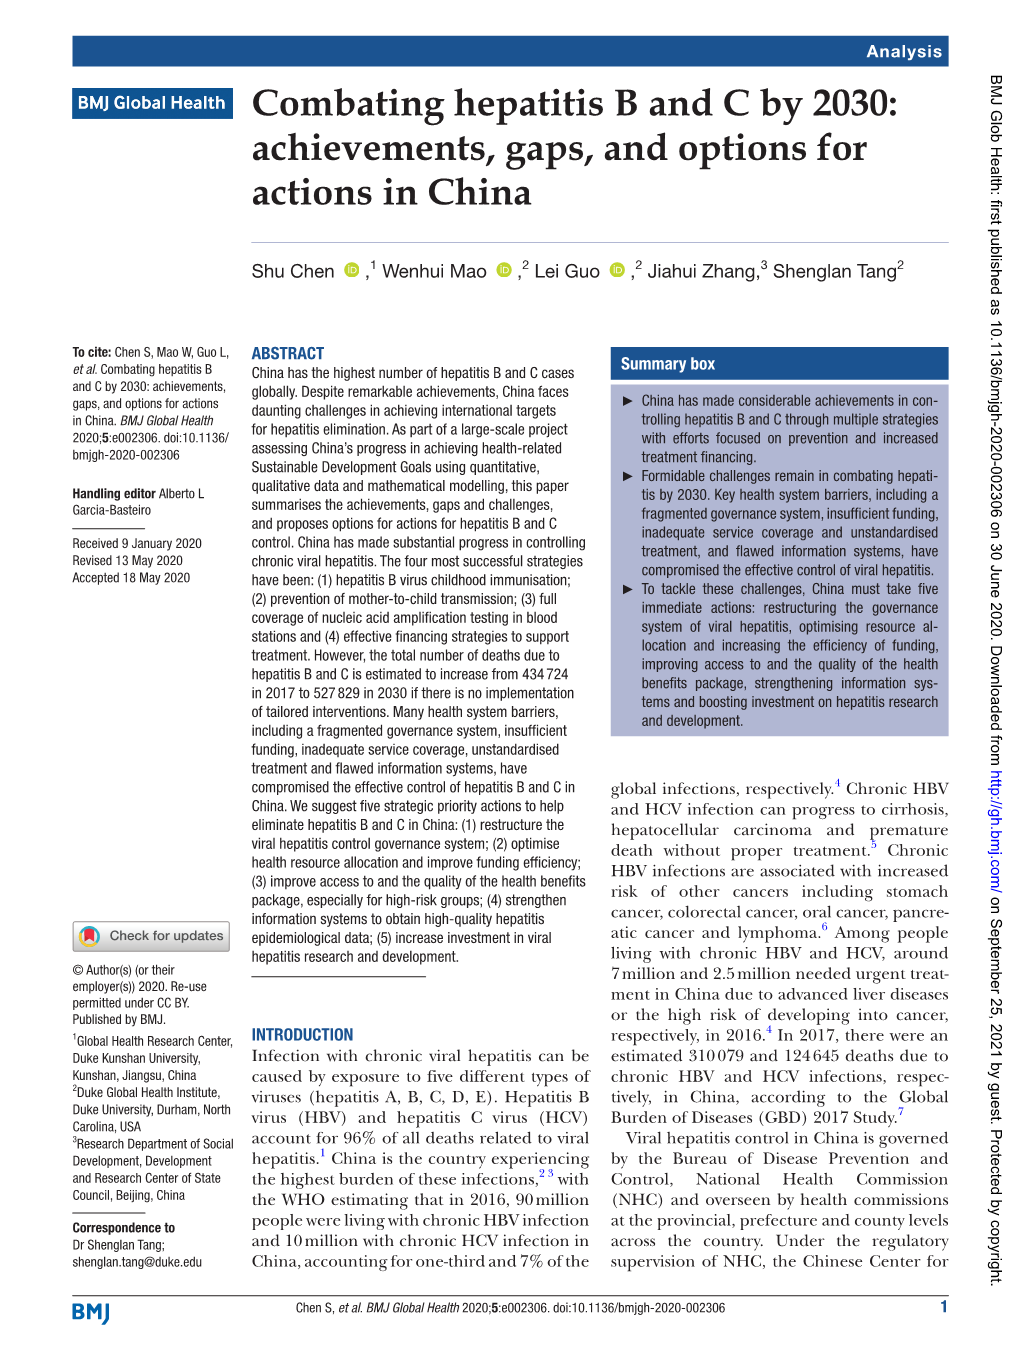 Combating Hepatitis B and C by 2030: Achievements, Gaps, and Options for Actions in China